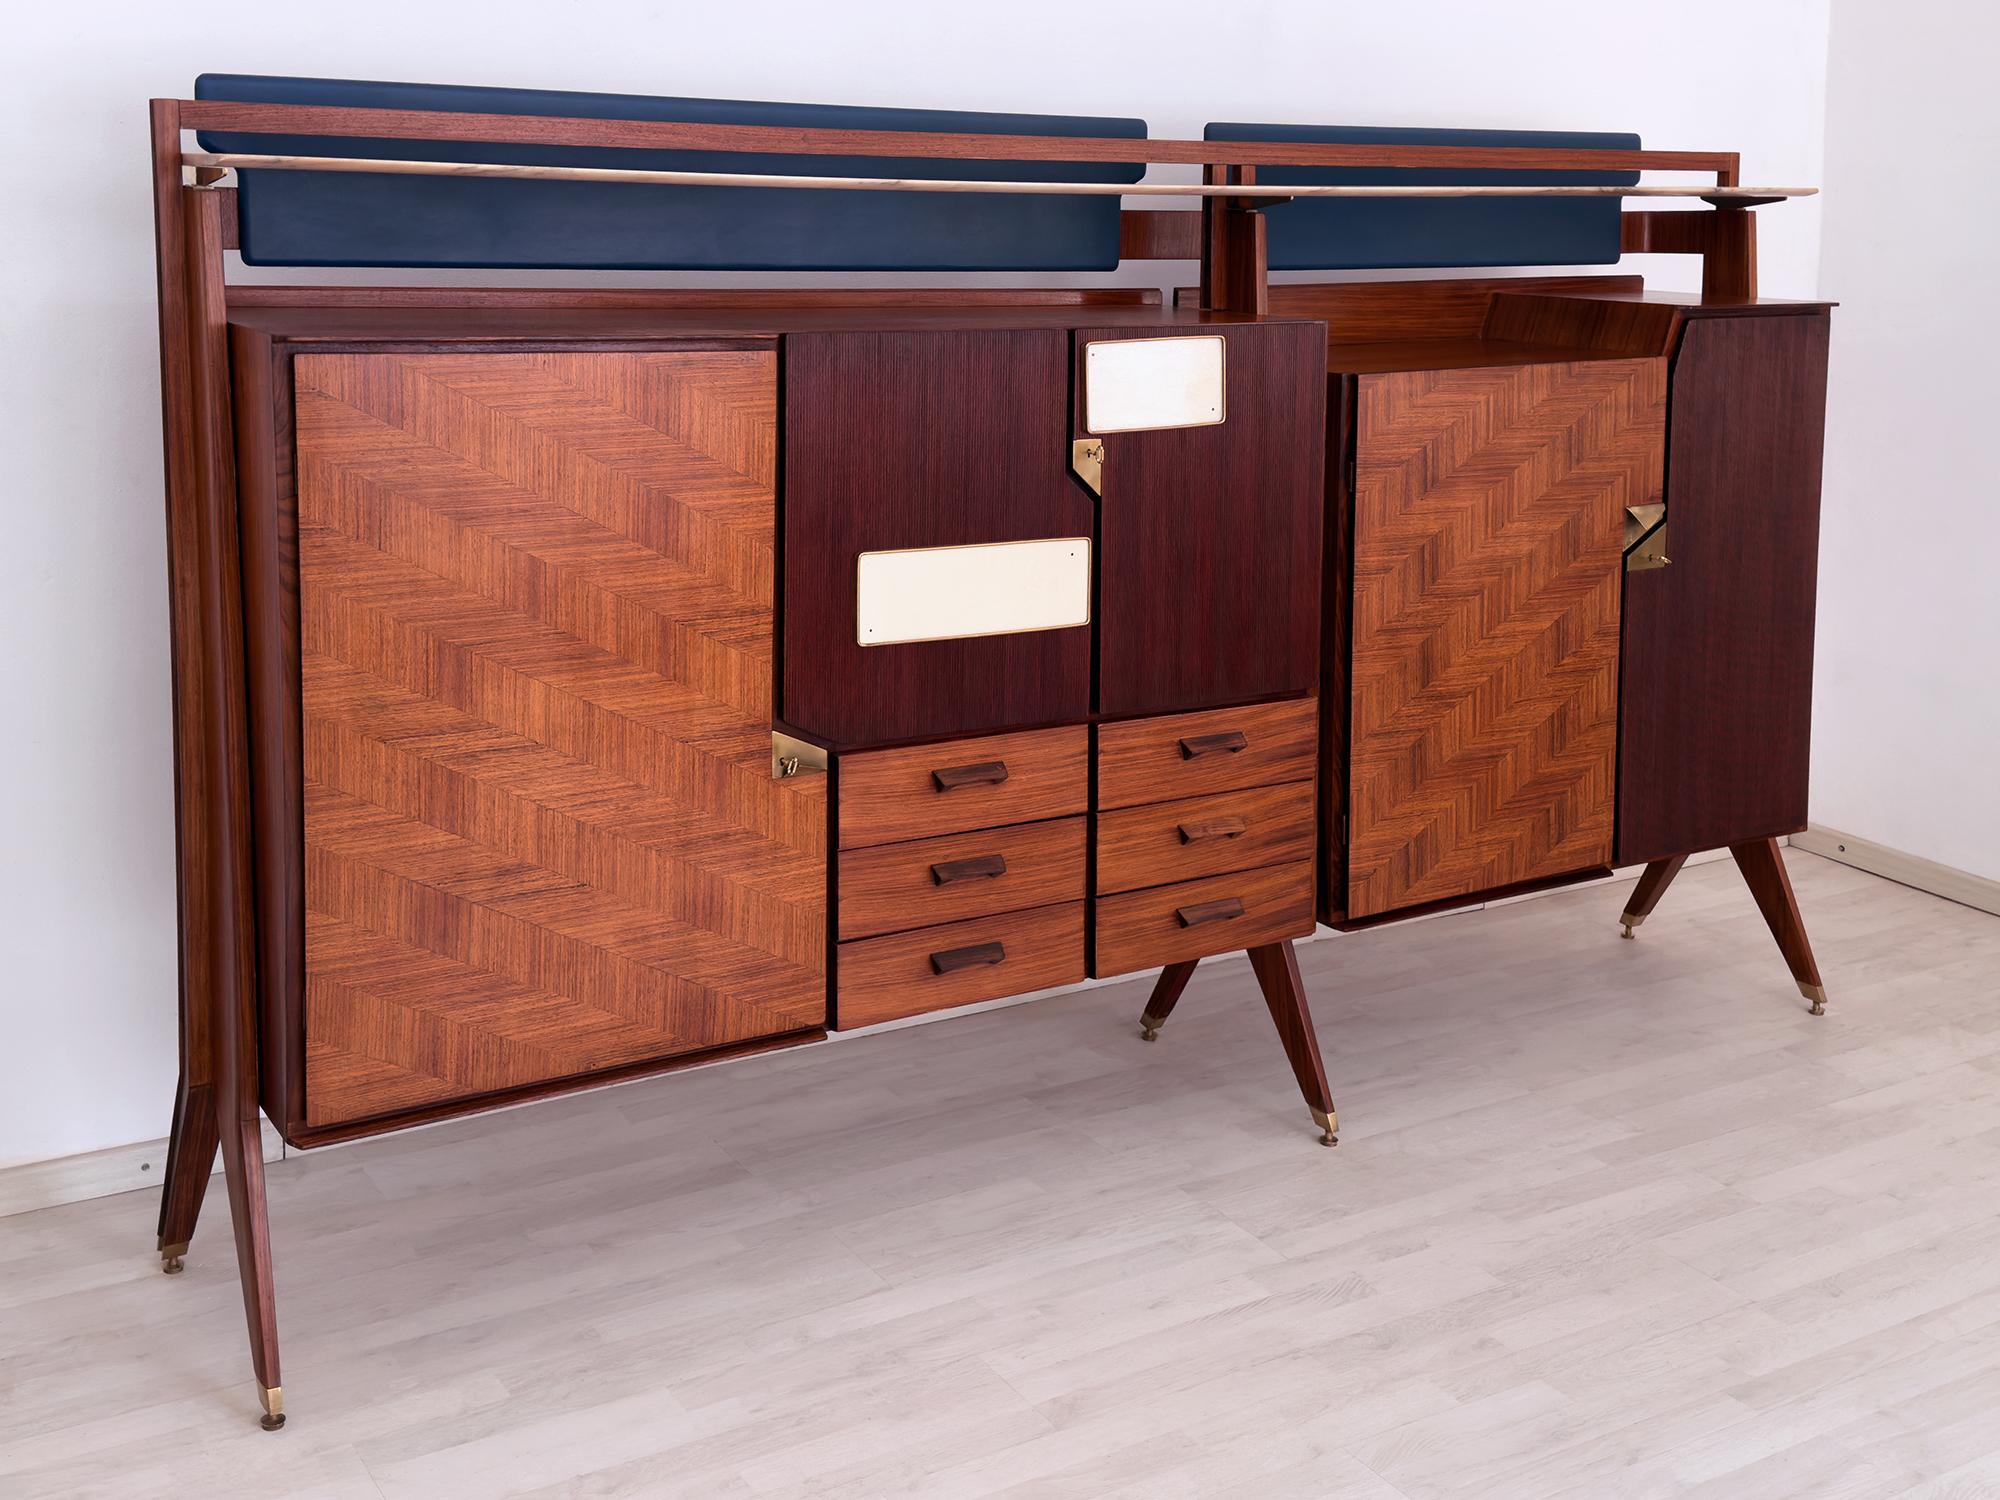 Italian Midcentury Sideboard or Bar Cabinet by La Permanente Mobili Cantù, 1950s For Sale 8